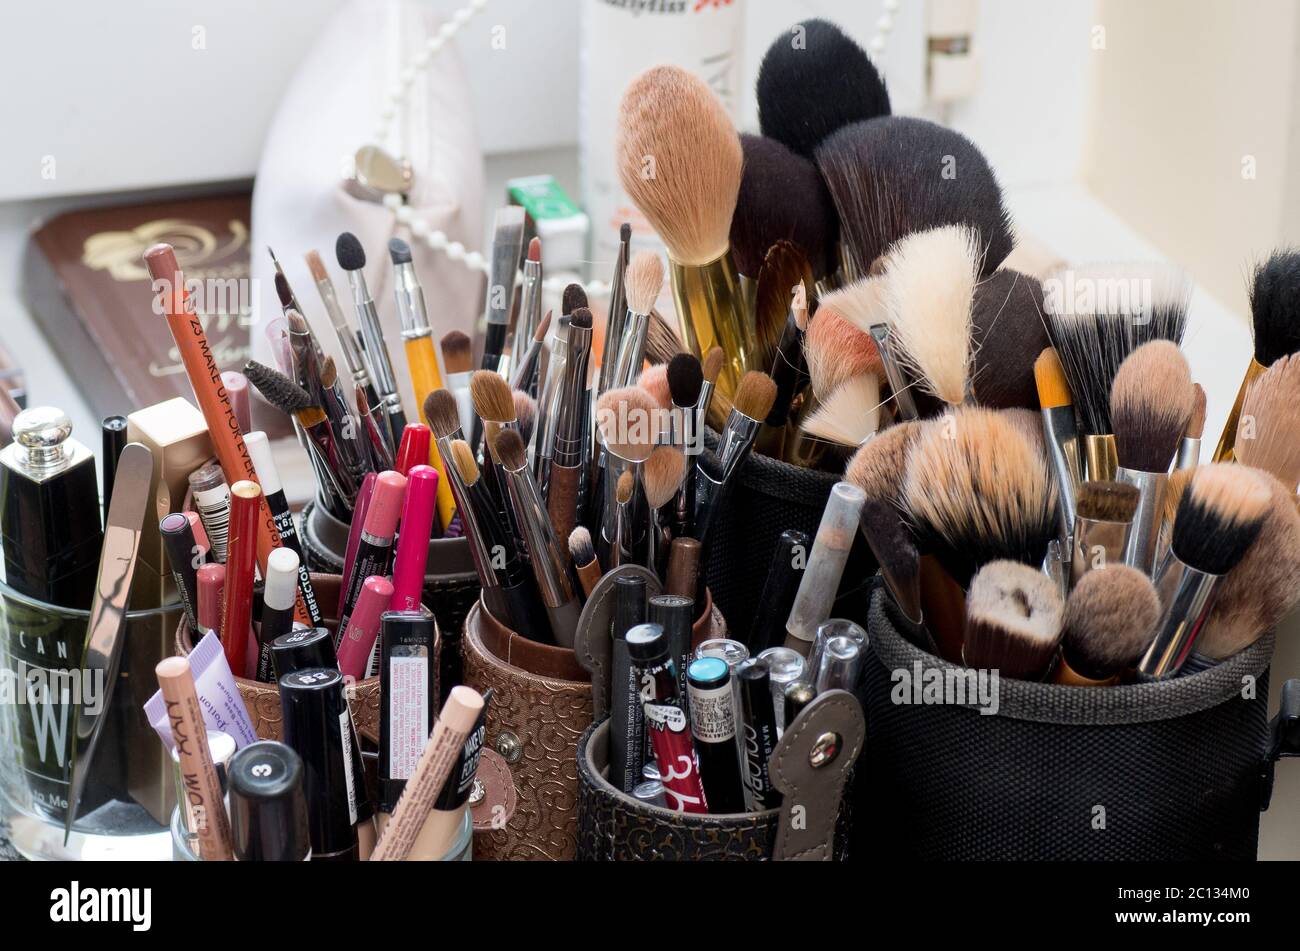 LITHUANIA, MAZEIKIAI - MAY 21, 2016: Used makeup brushes and cosmetics in beauty salon Stock Photo